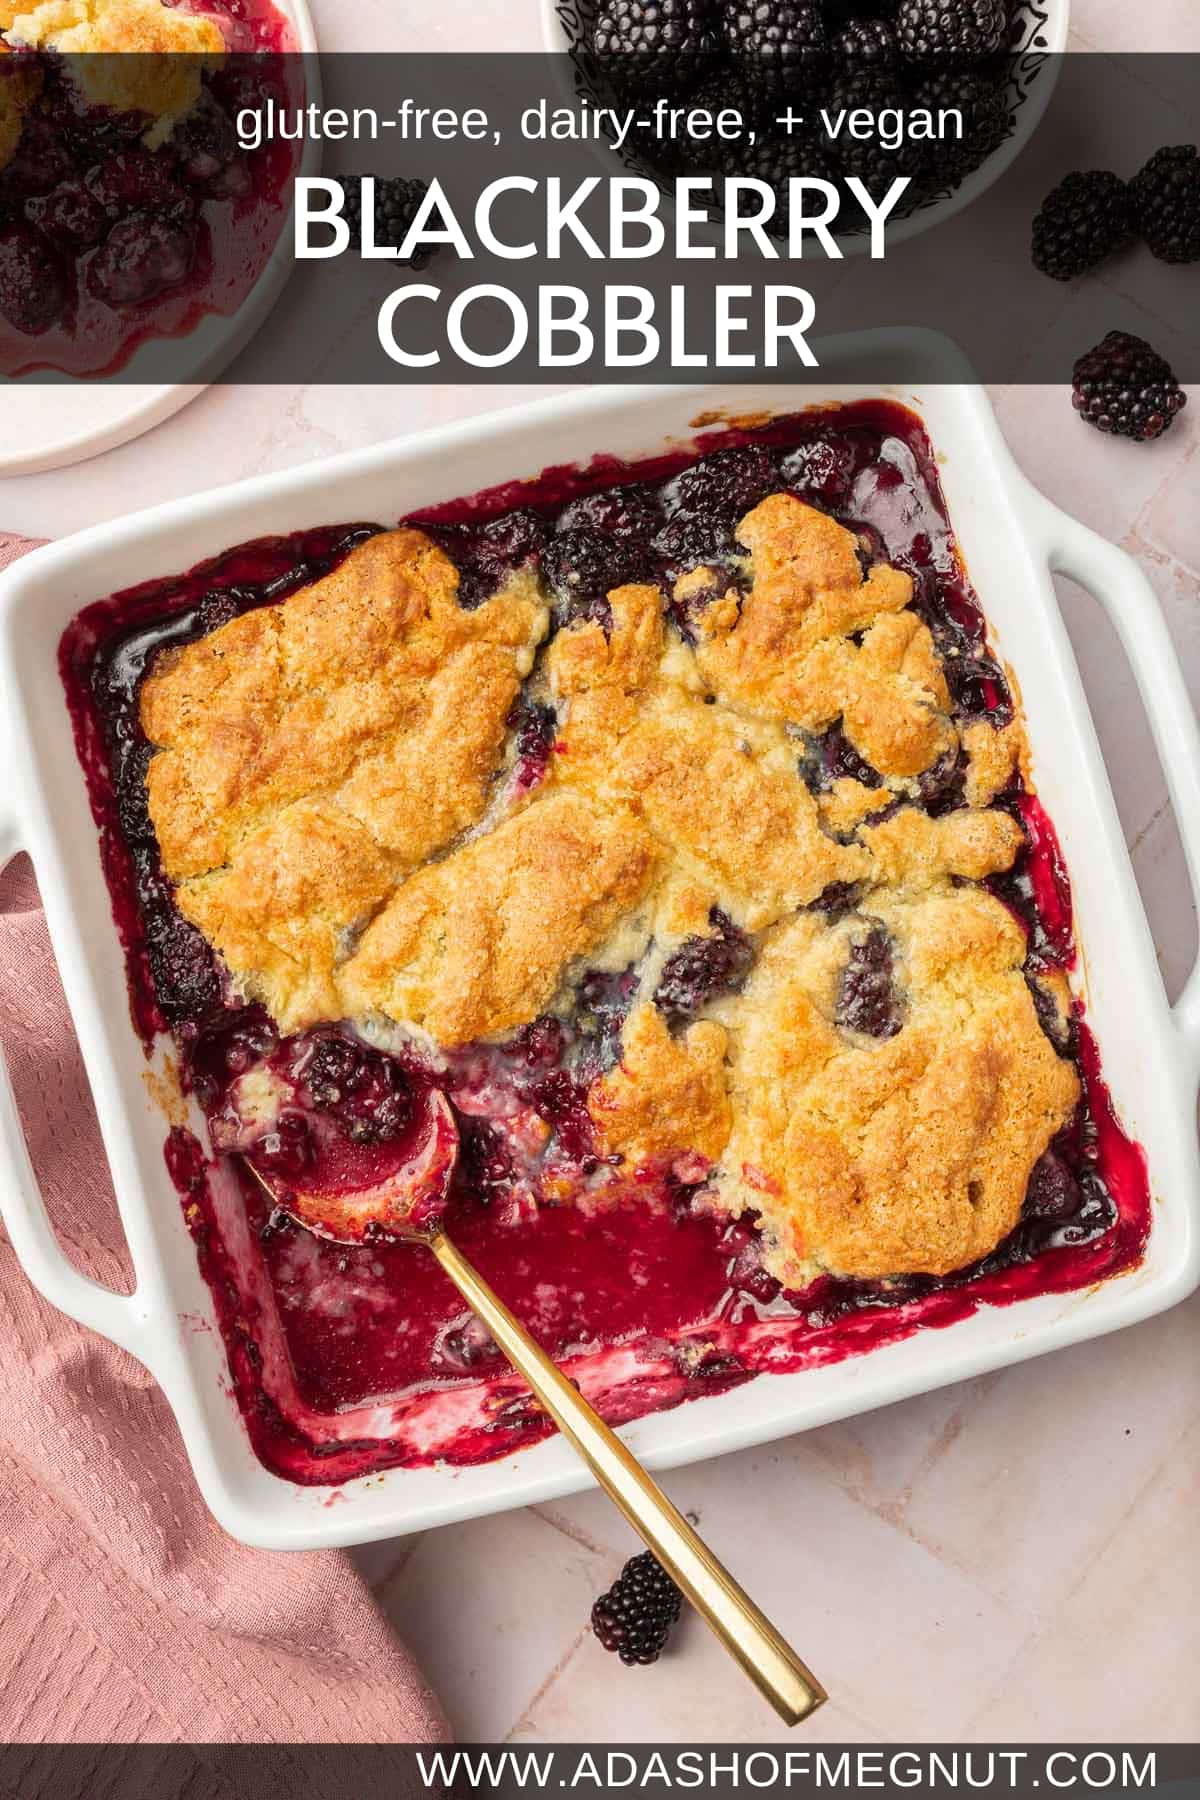 Gluten-free blackberry cobbler in a square baking dish with a spoon and a portion missing from the pan.